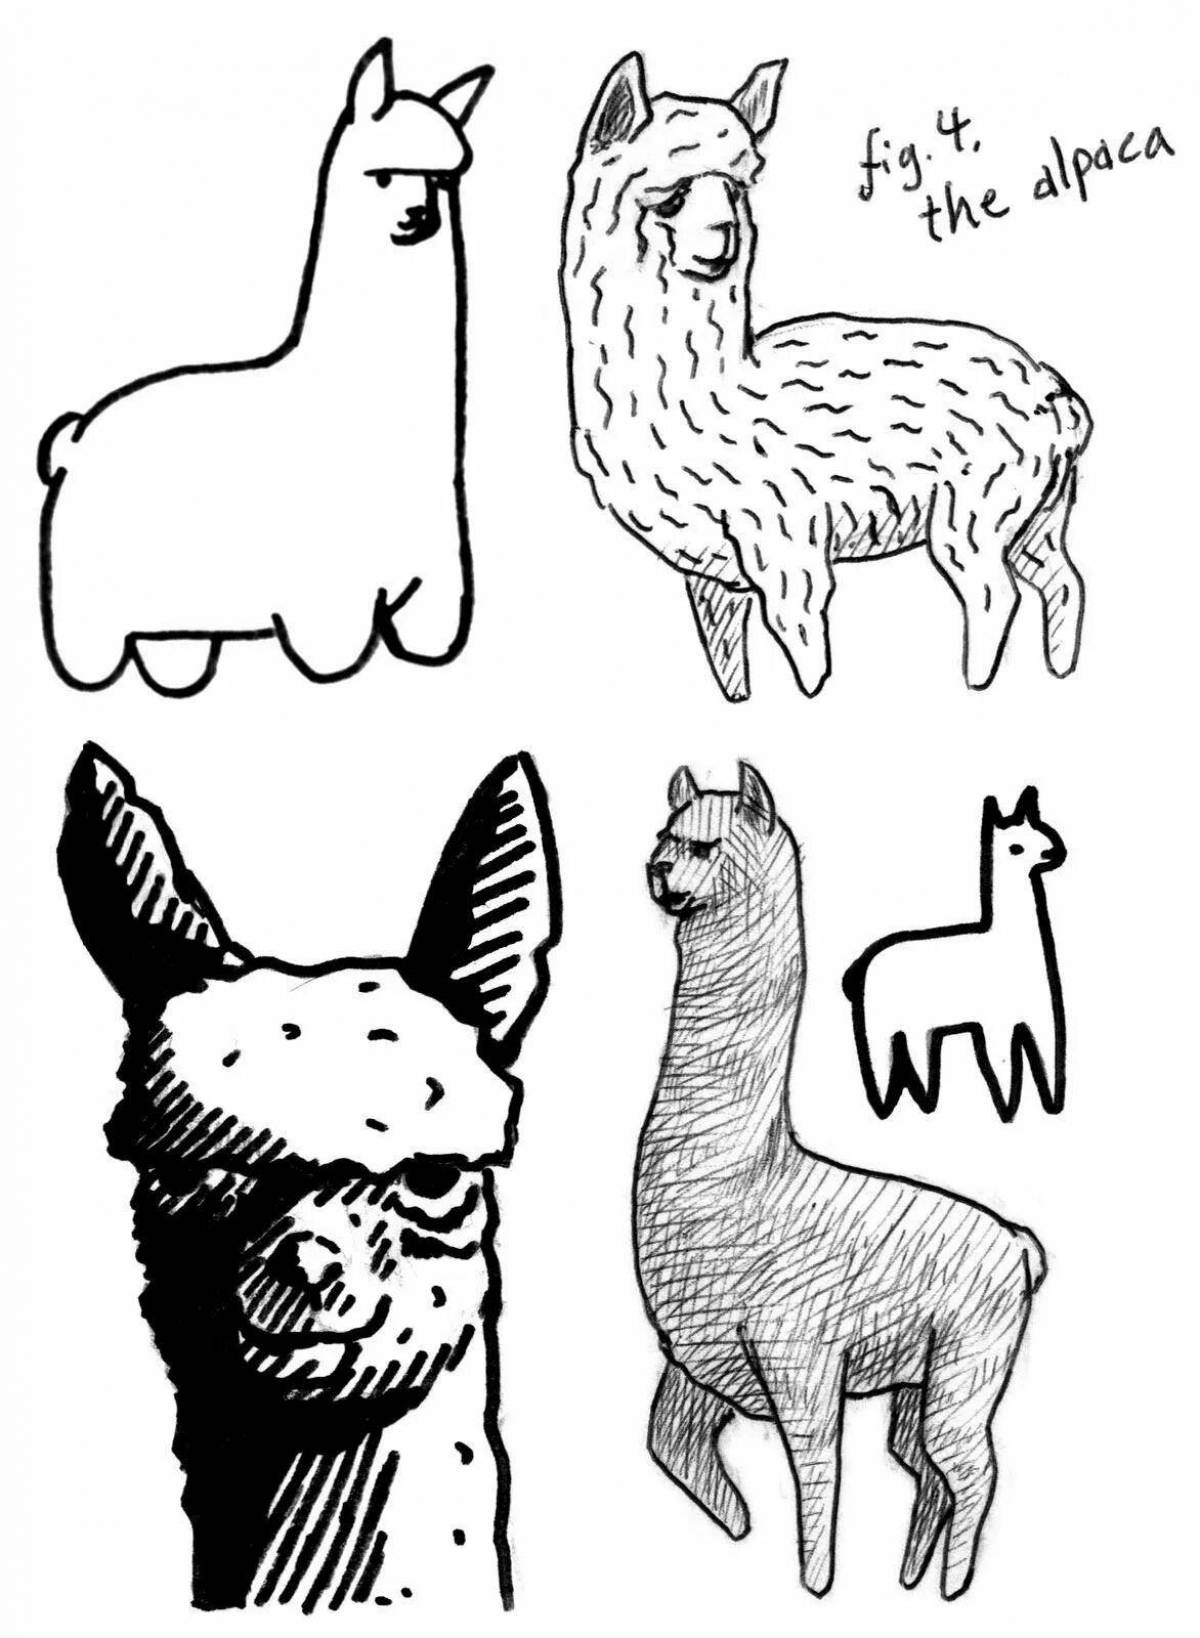 Great coloring book for animal sketch markers